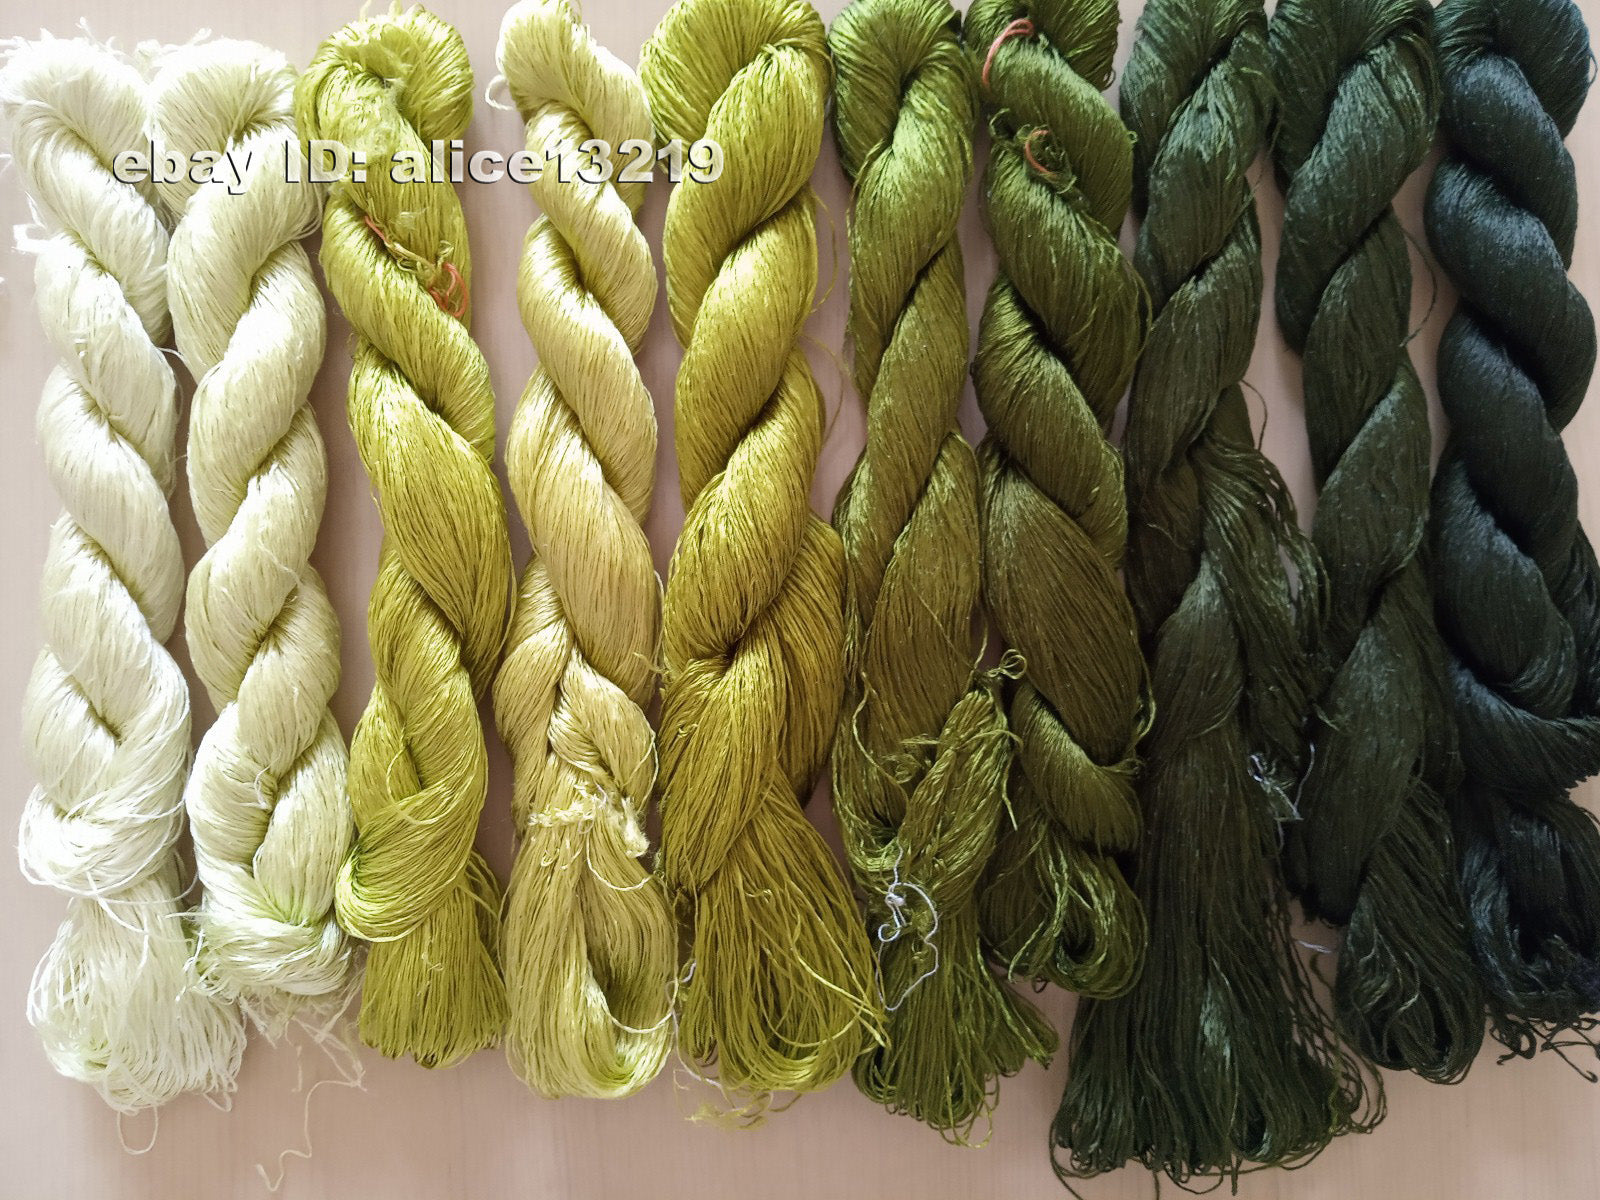 10bundles 100%real mulberry silk,hand-dyed embroidery silk floss/thread N44